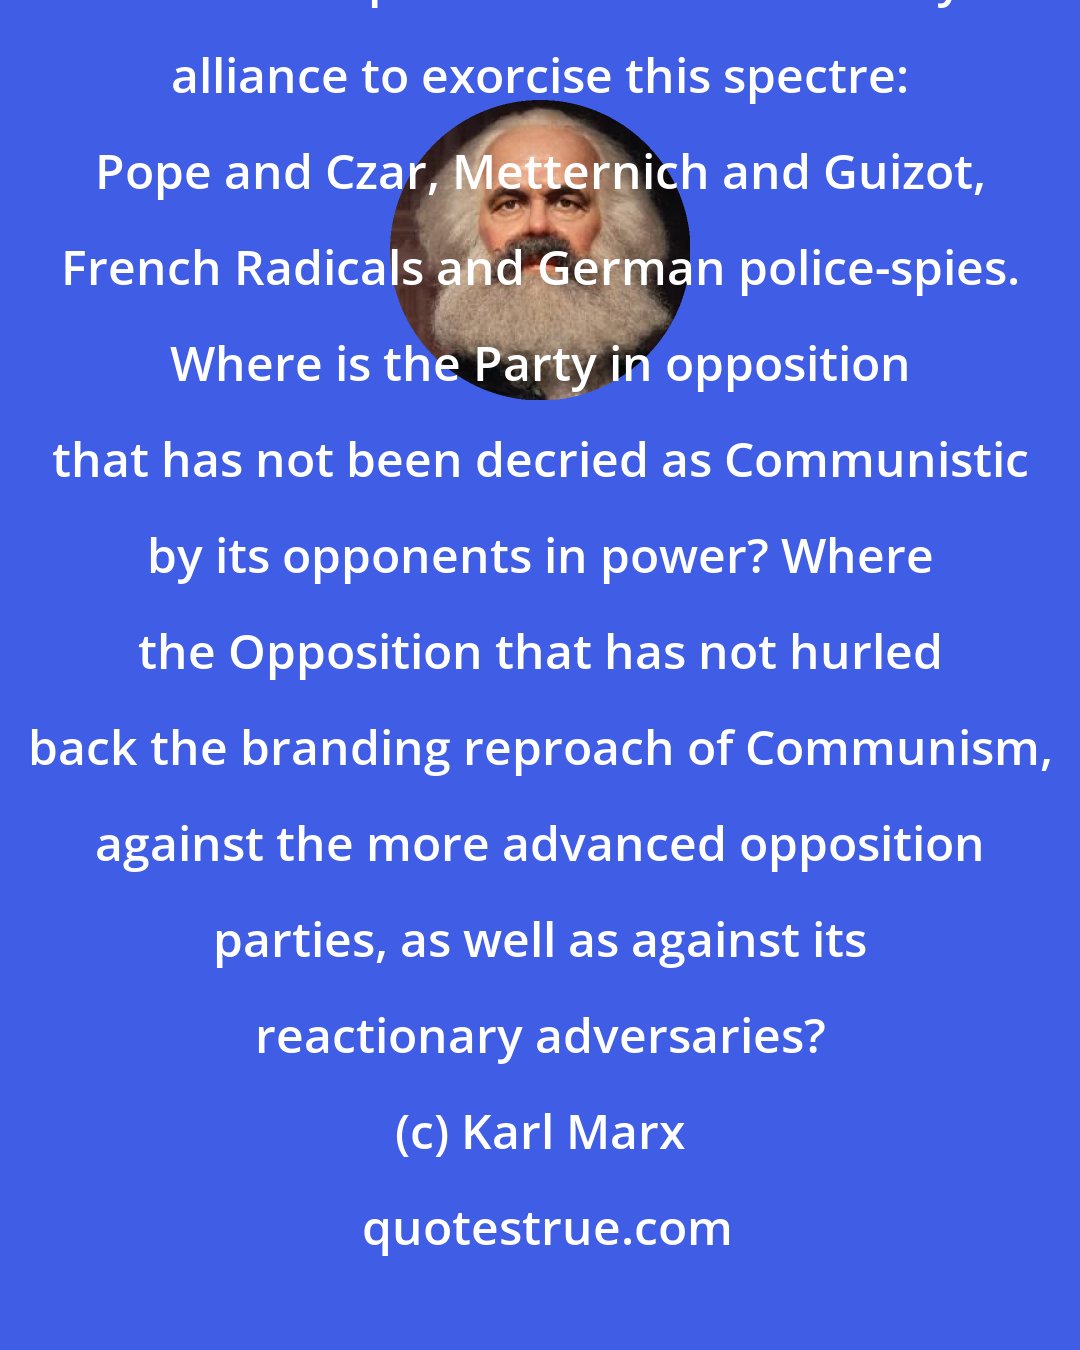 Karl Marx: A spectre is haunting Europe-the spectre of Communism. All the Powers of old Europe have entered into holy alliance to exorcise this spectre: Pope and Czar, Metternich and Guizot, French Radicals and German police-spies. Where is the Party in opposition that has not been decried as Communistic by its opponents in power? Where the Opposition that has not hurled back the branding reproach of Communism, against the more advanced opposition parties, as well as against its reactionary adversaries?